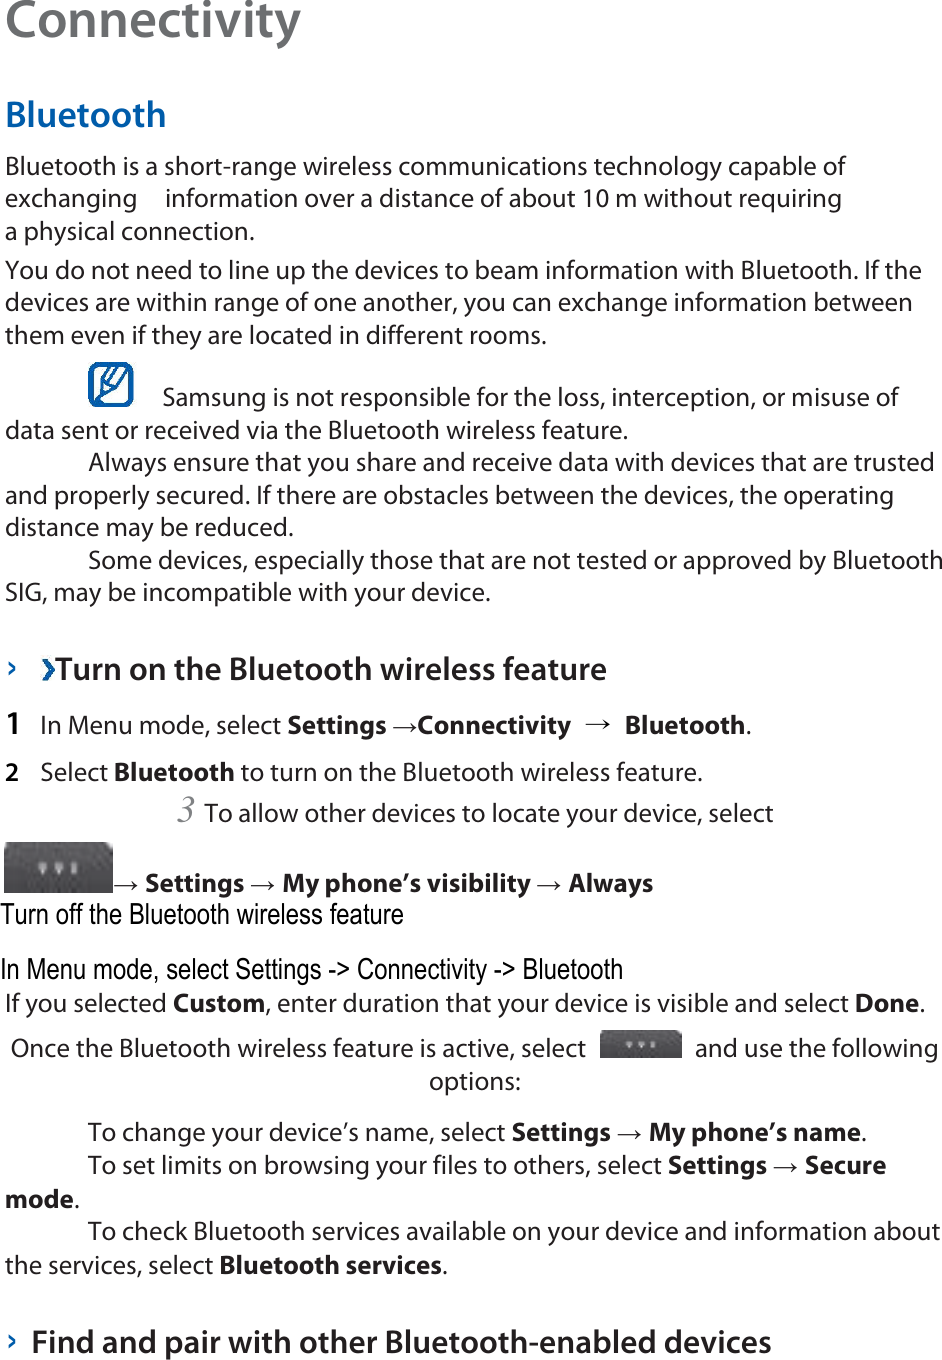 Connectivity   Bluetooth   Bluetooth is a short-range wireless communications technology capable of exchanging    information over a distance of about 10 m without requiring a physical connection.   You do not need to line up the devices to beam information with Bluetooth. If the devices are within range of one another, you can exchange information between them even if they are located in different rooms.     Samsung is not responsible for the loss, interception, or misuse of data sent or received via the Bluetooth wireless feature.    Always ensure that you share and receive data with devices that are trusted and properly secured. If there are obstacles between the devices, the operating distance may be reduced.    Some devices, especially those that are not tested or approved by Bluetooth SIG, may be incompatible with your device.    ›  Turn on the Bluetooth wireless feature   1  In Menu mode, select Settings →Connectivity  → Bluetooth.   2  Select Bluetooth to turn on the Bluetooth wireless feature.   3 To allow other devices to locate your device, select   → Settings → My phone’s visibility → Always   If you selected Custom, enter duration that your device is visible and select Done.   Once the Bluetooth wireless feature is active, select   and use the following options:    To change your device’s name, select Settings → My phone’s name.    To set limits on browsing your files to others, select Settings → Secure mode.    To check Bluetooth services available on your device and information about the services, select Bluetooth services.    › Find and pair with other Bluetooth-enabled devices   Turn off the Bluetooth wireless feature In Menu mode, select Settings -&gt; Connectivity -&gt; Bluetooth